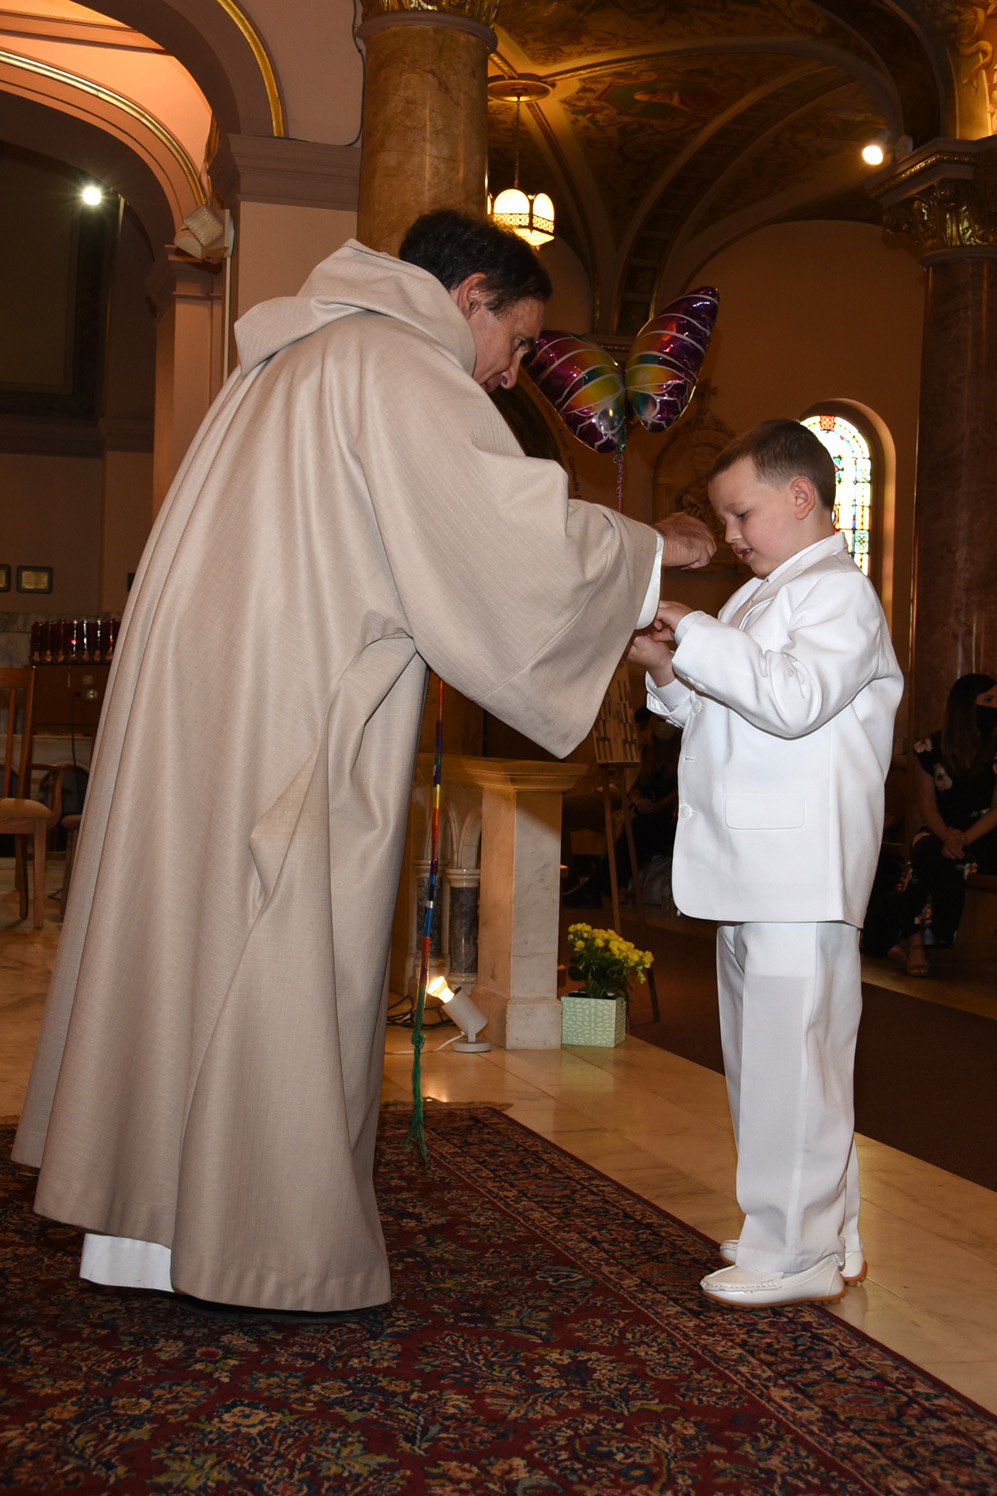 FIRST-COMMUNION-MAY-16-2021-115